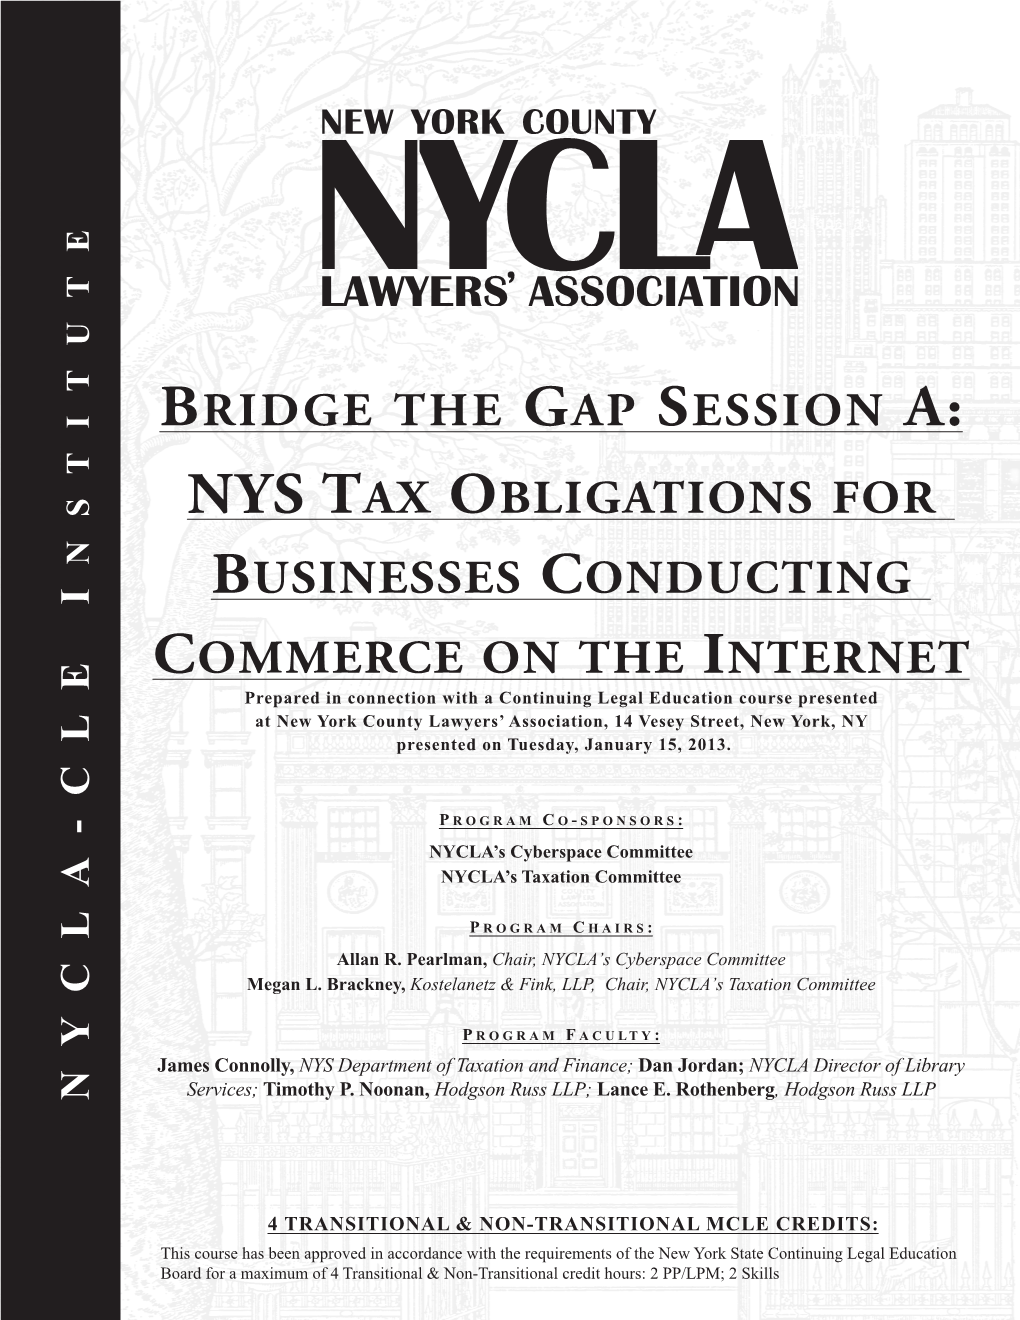 NYS Tax Obligations for Businesses Conducting Commerce on the Internet Tuesday, January 15, 2012 5:30 PM to 9:00 PM